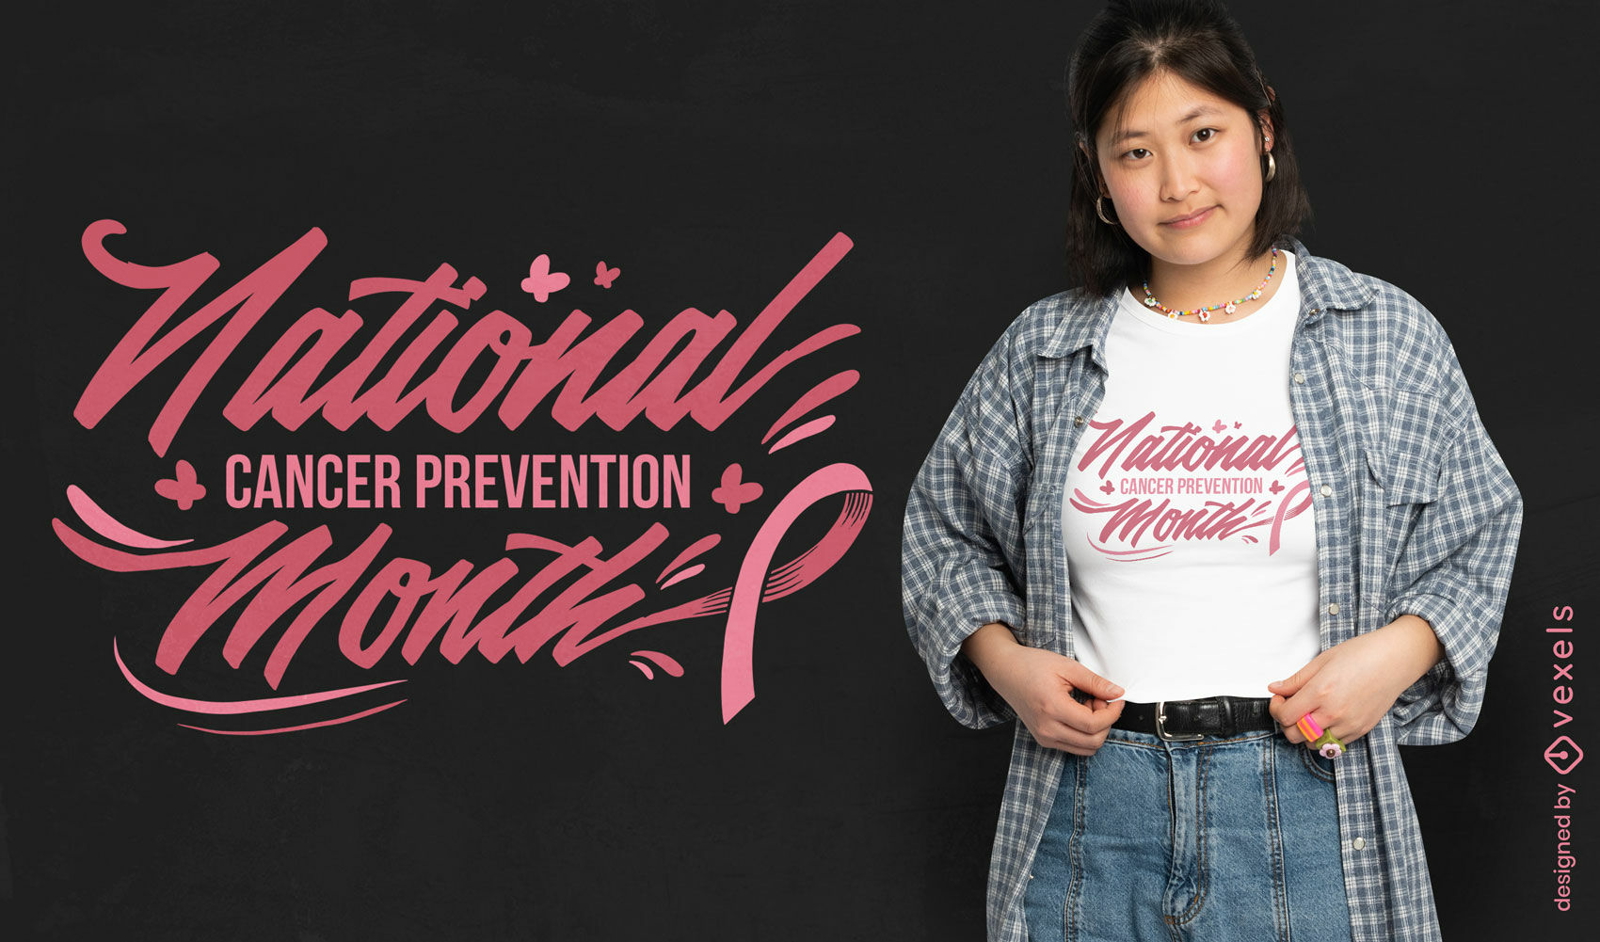 Cancer prevention month quote t-shirt design